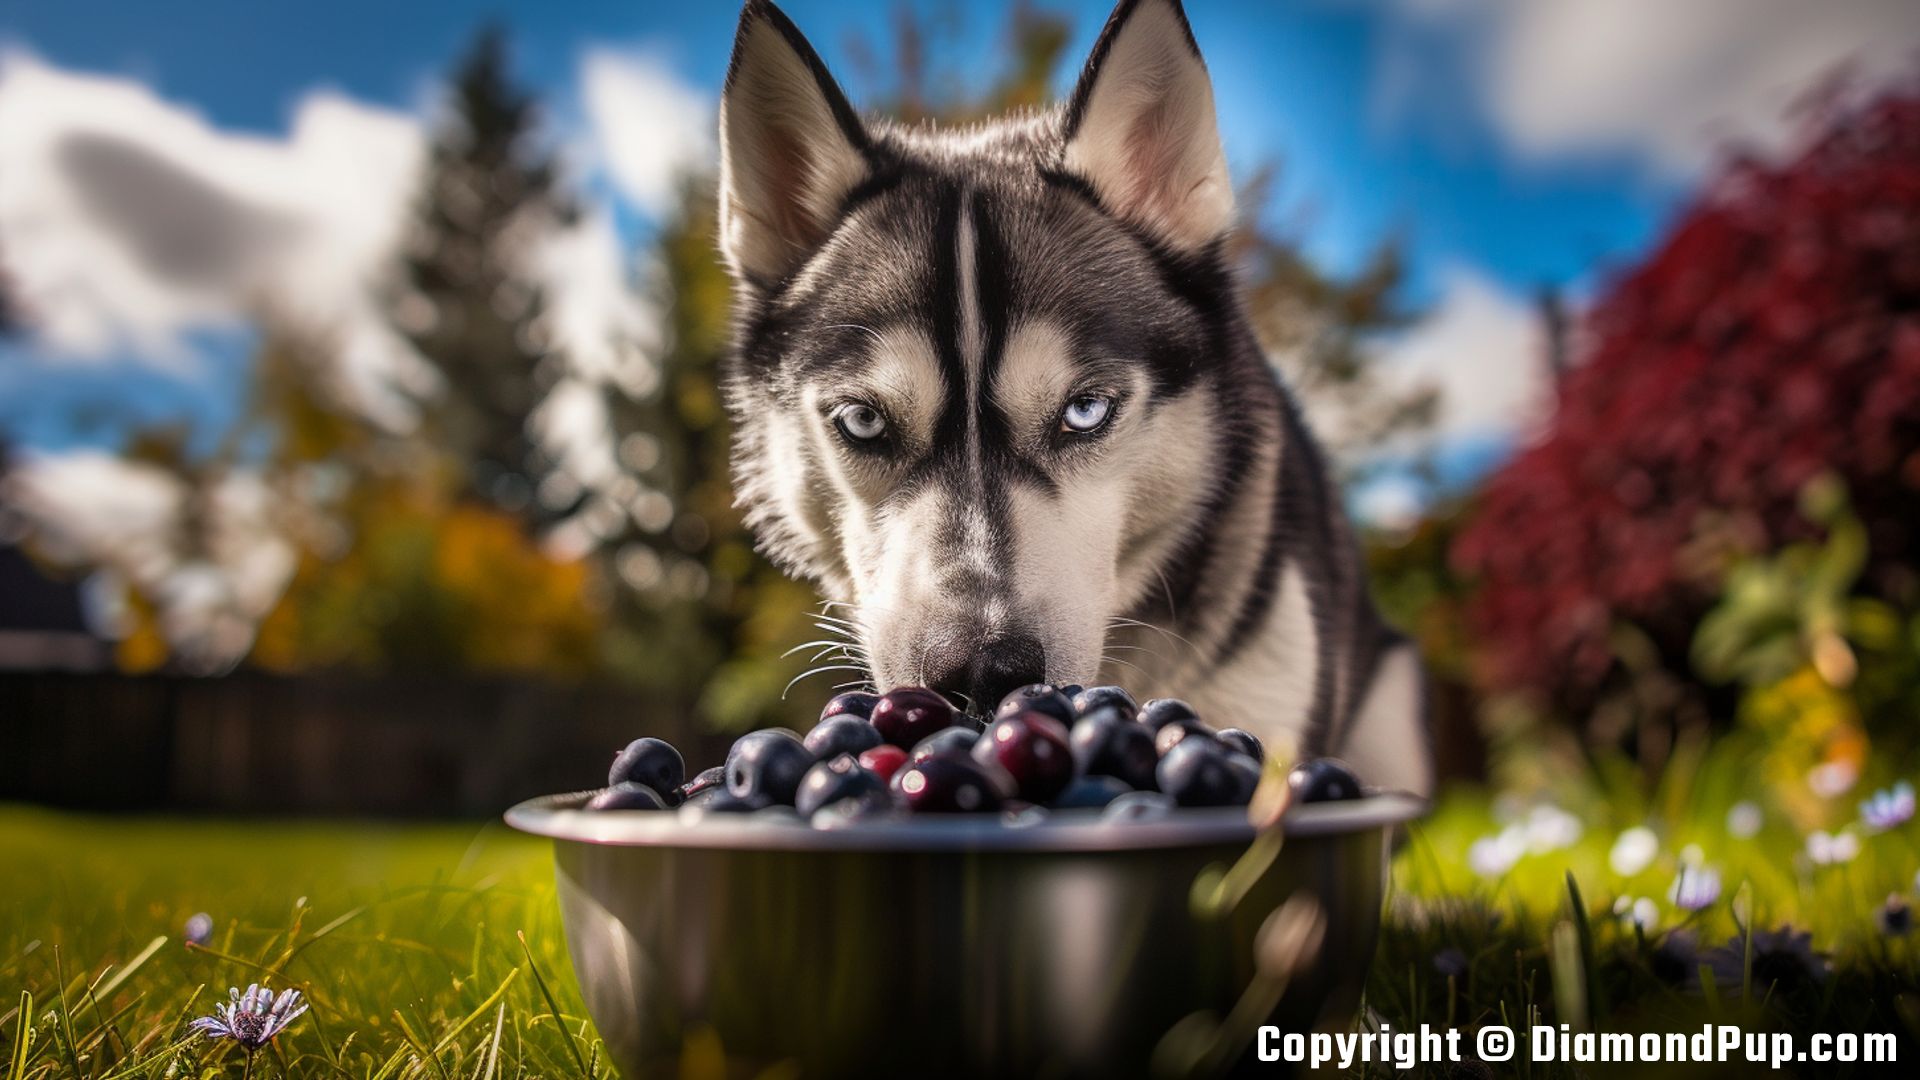 Photograph of a Playful Husky Eating Blueberries